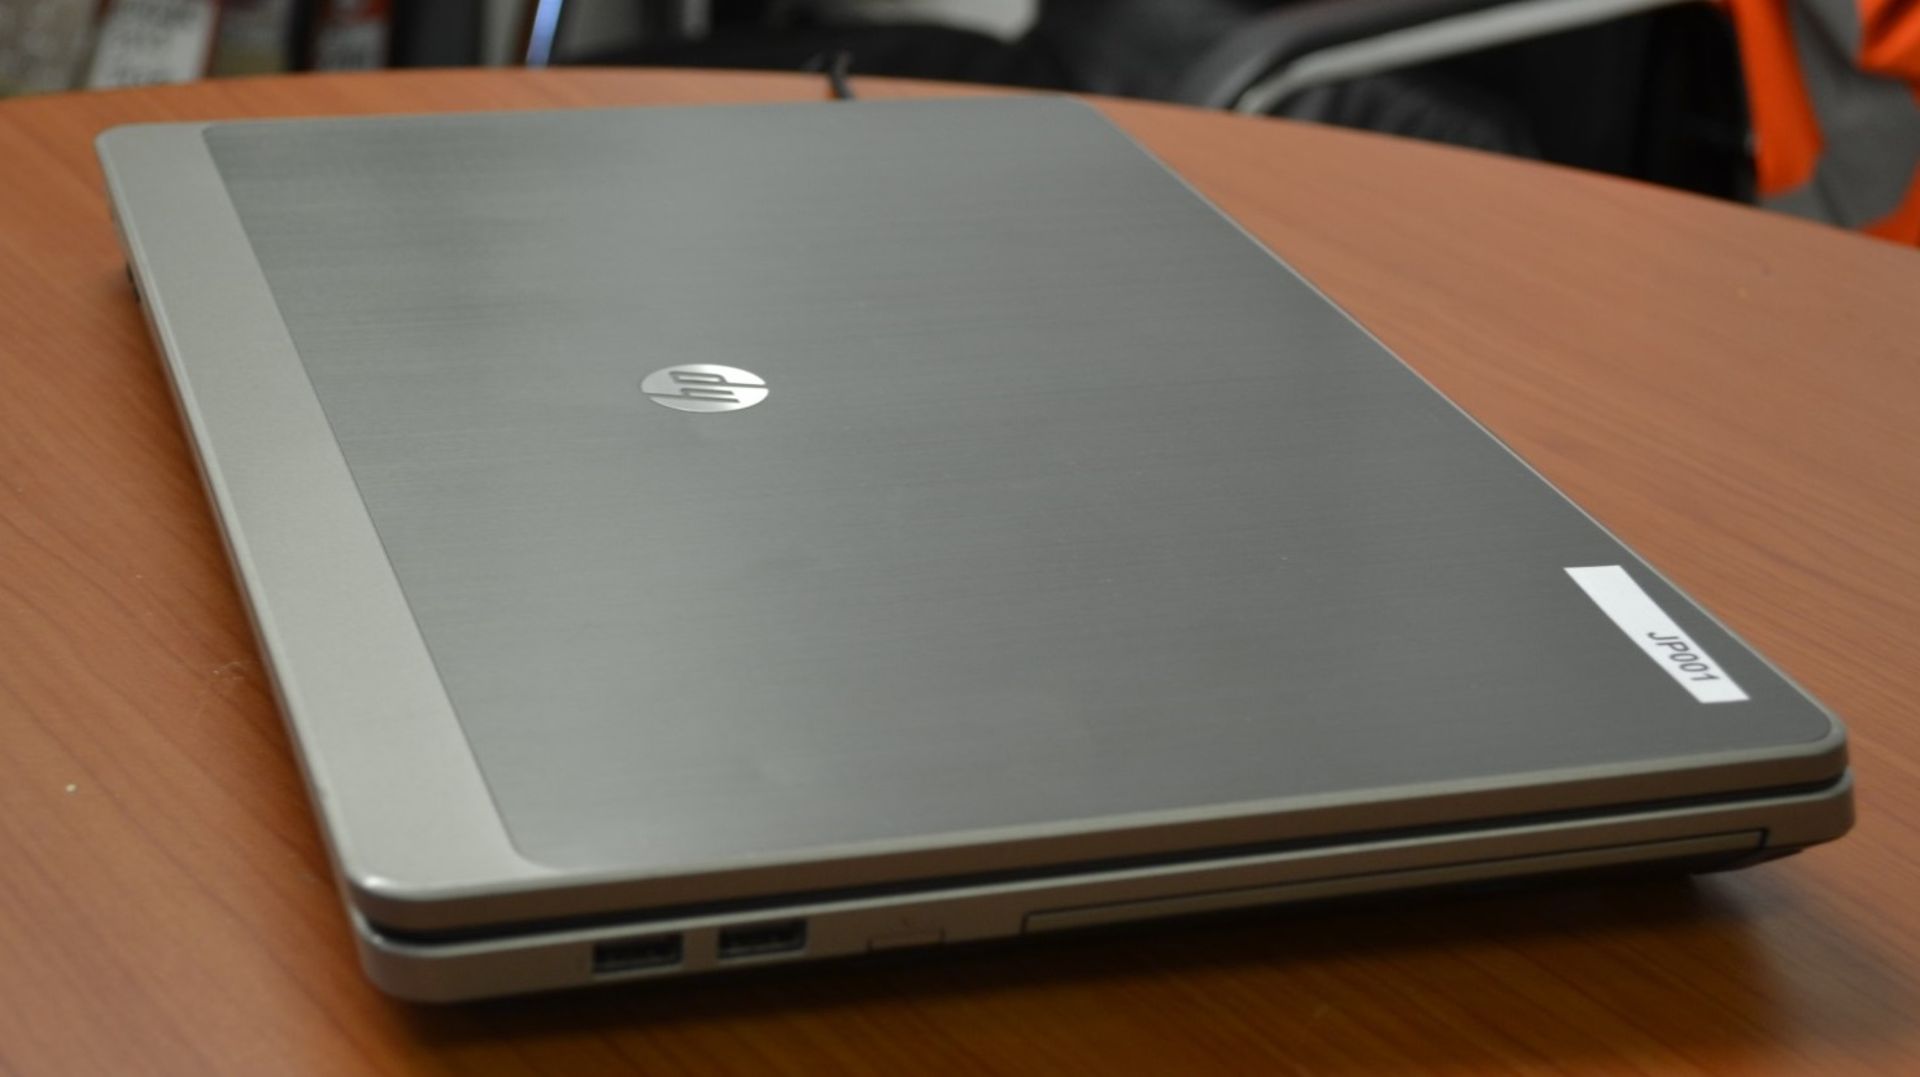 1 x HP Probook 4530s Laptop Computer - 15.6 Inch Screen Size - Features Intel Core i3-2350M Dual - Image 6 of 6